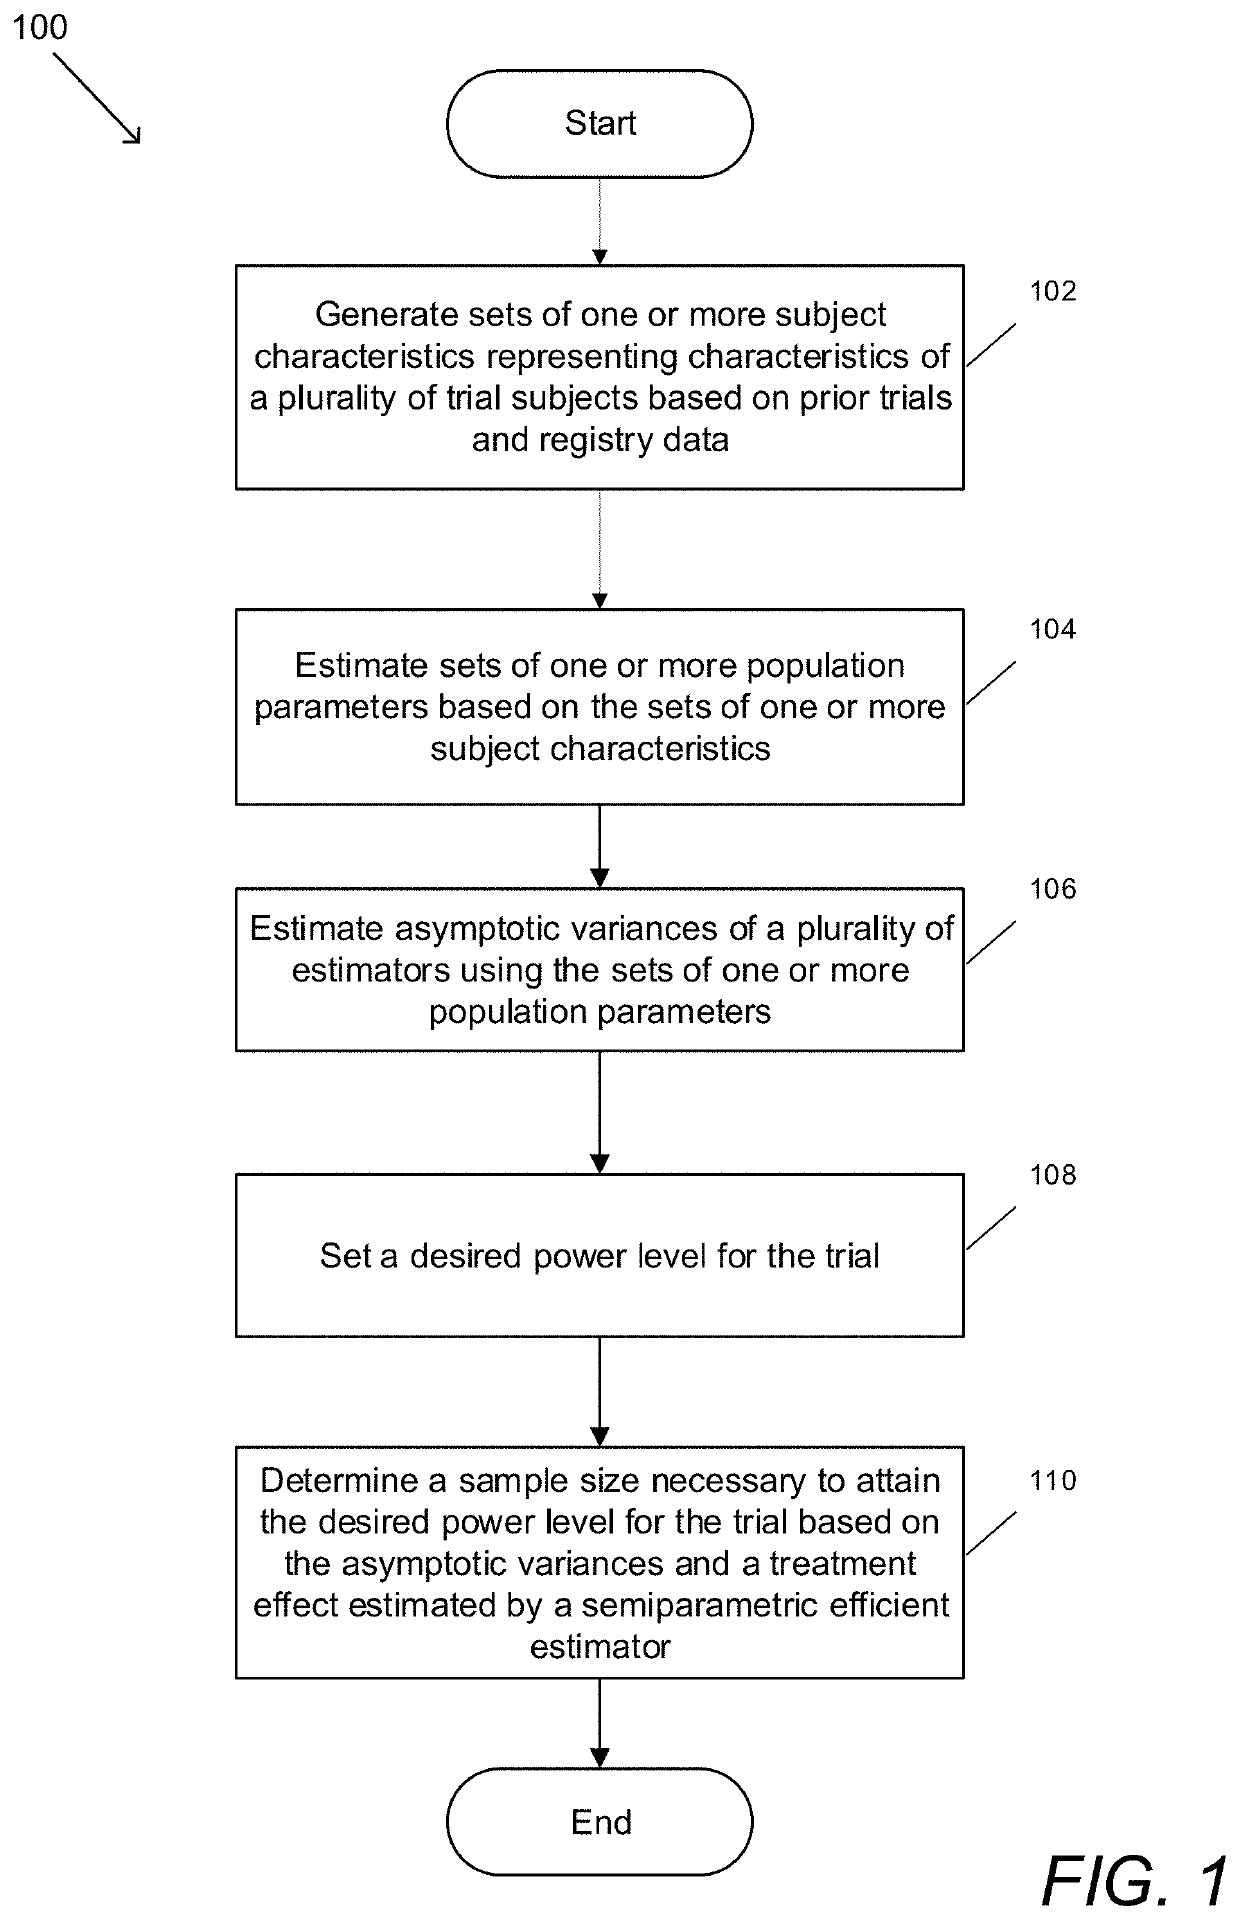 Systems and Methods for Designing Efficient Randomized Trials Using Semiparametric Efficient Estimators for Power and Sample Size Calculation